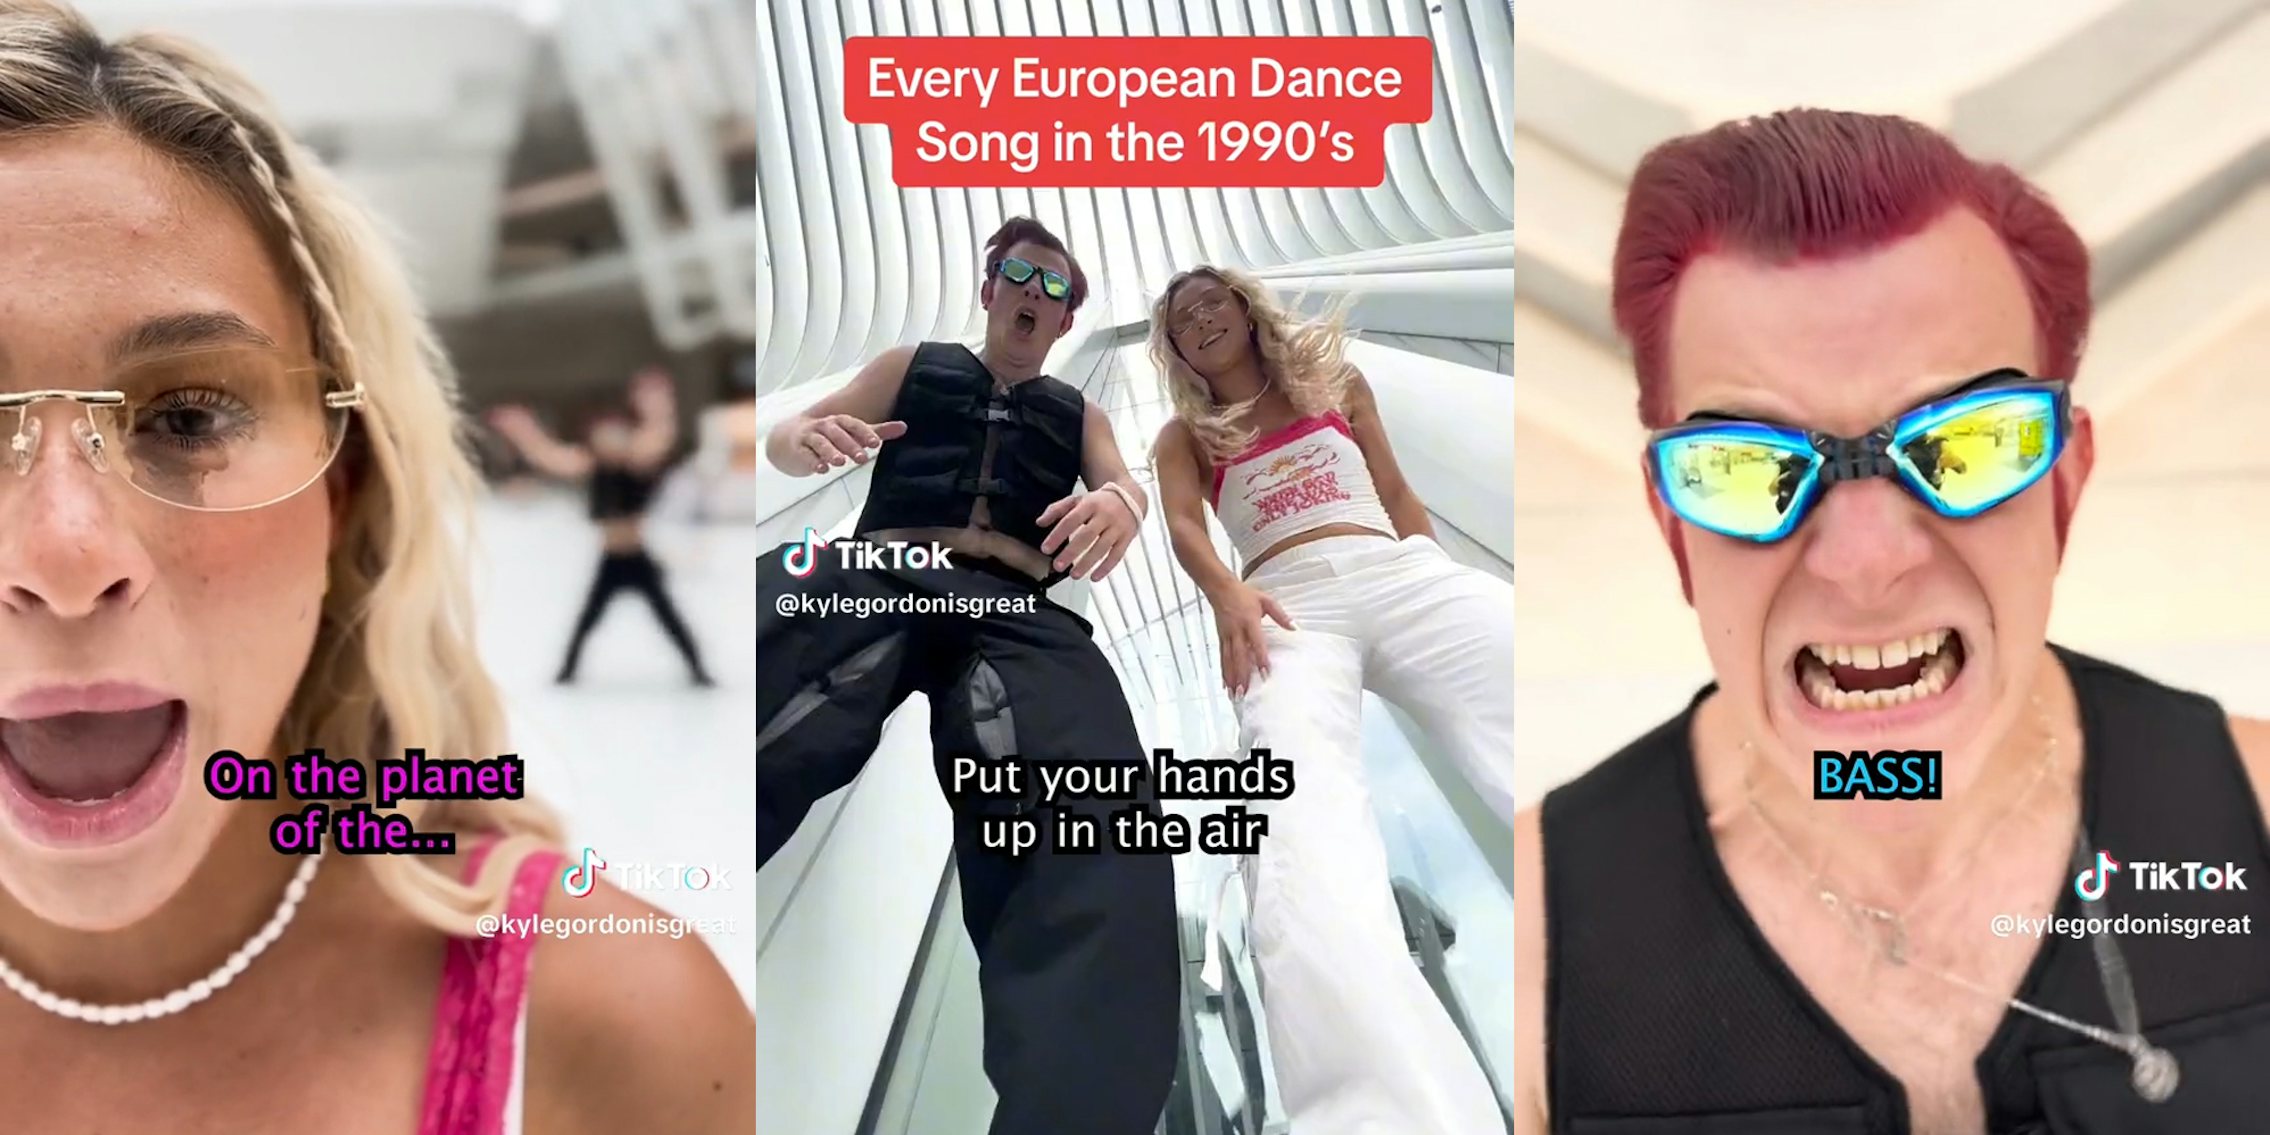 man and woman dancing with caption 'every european dance song in the 1990s'